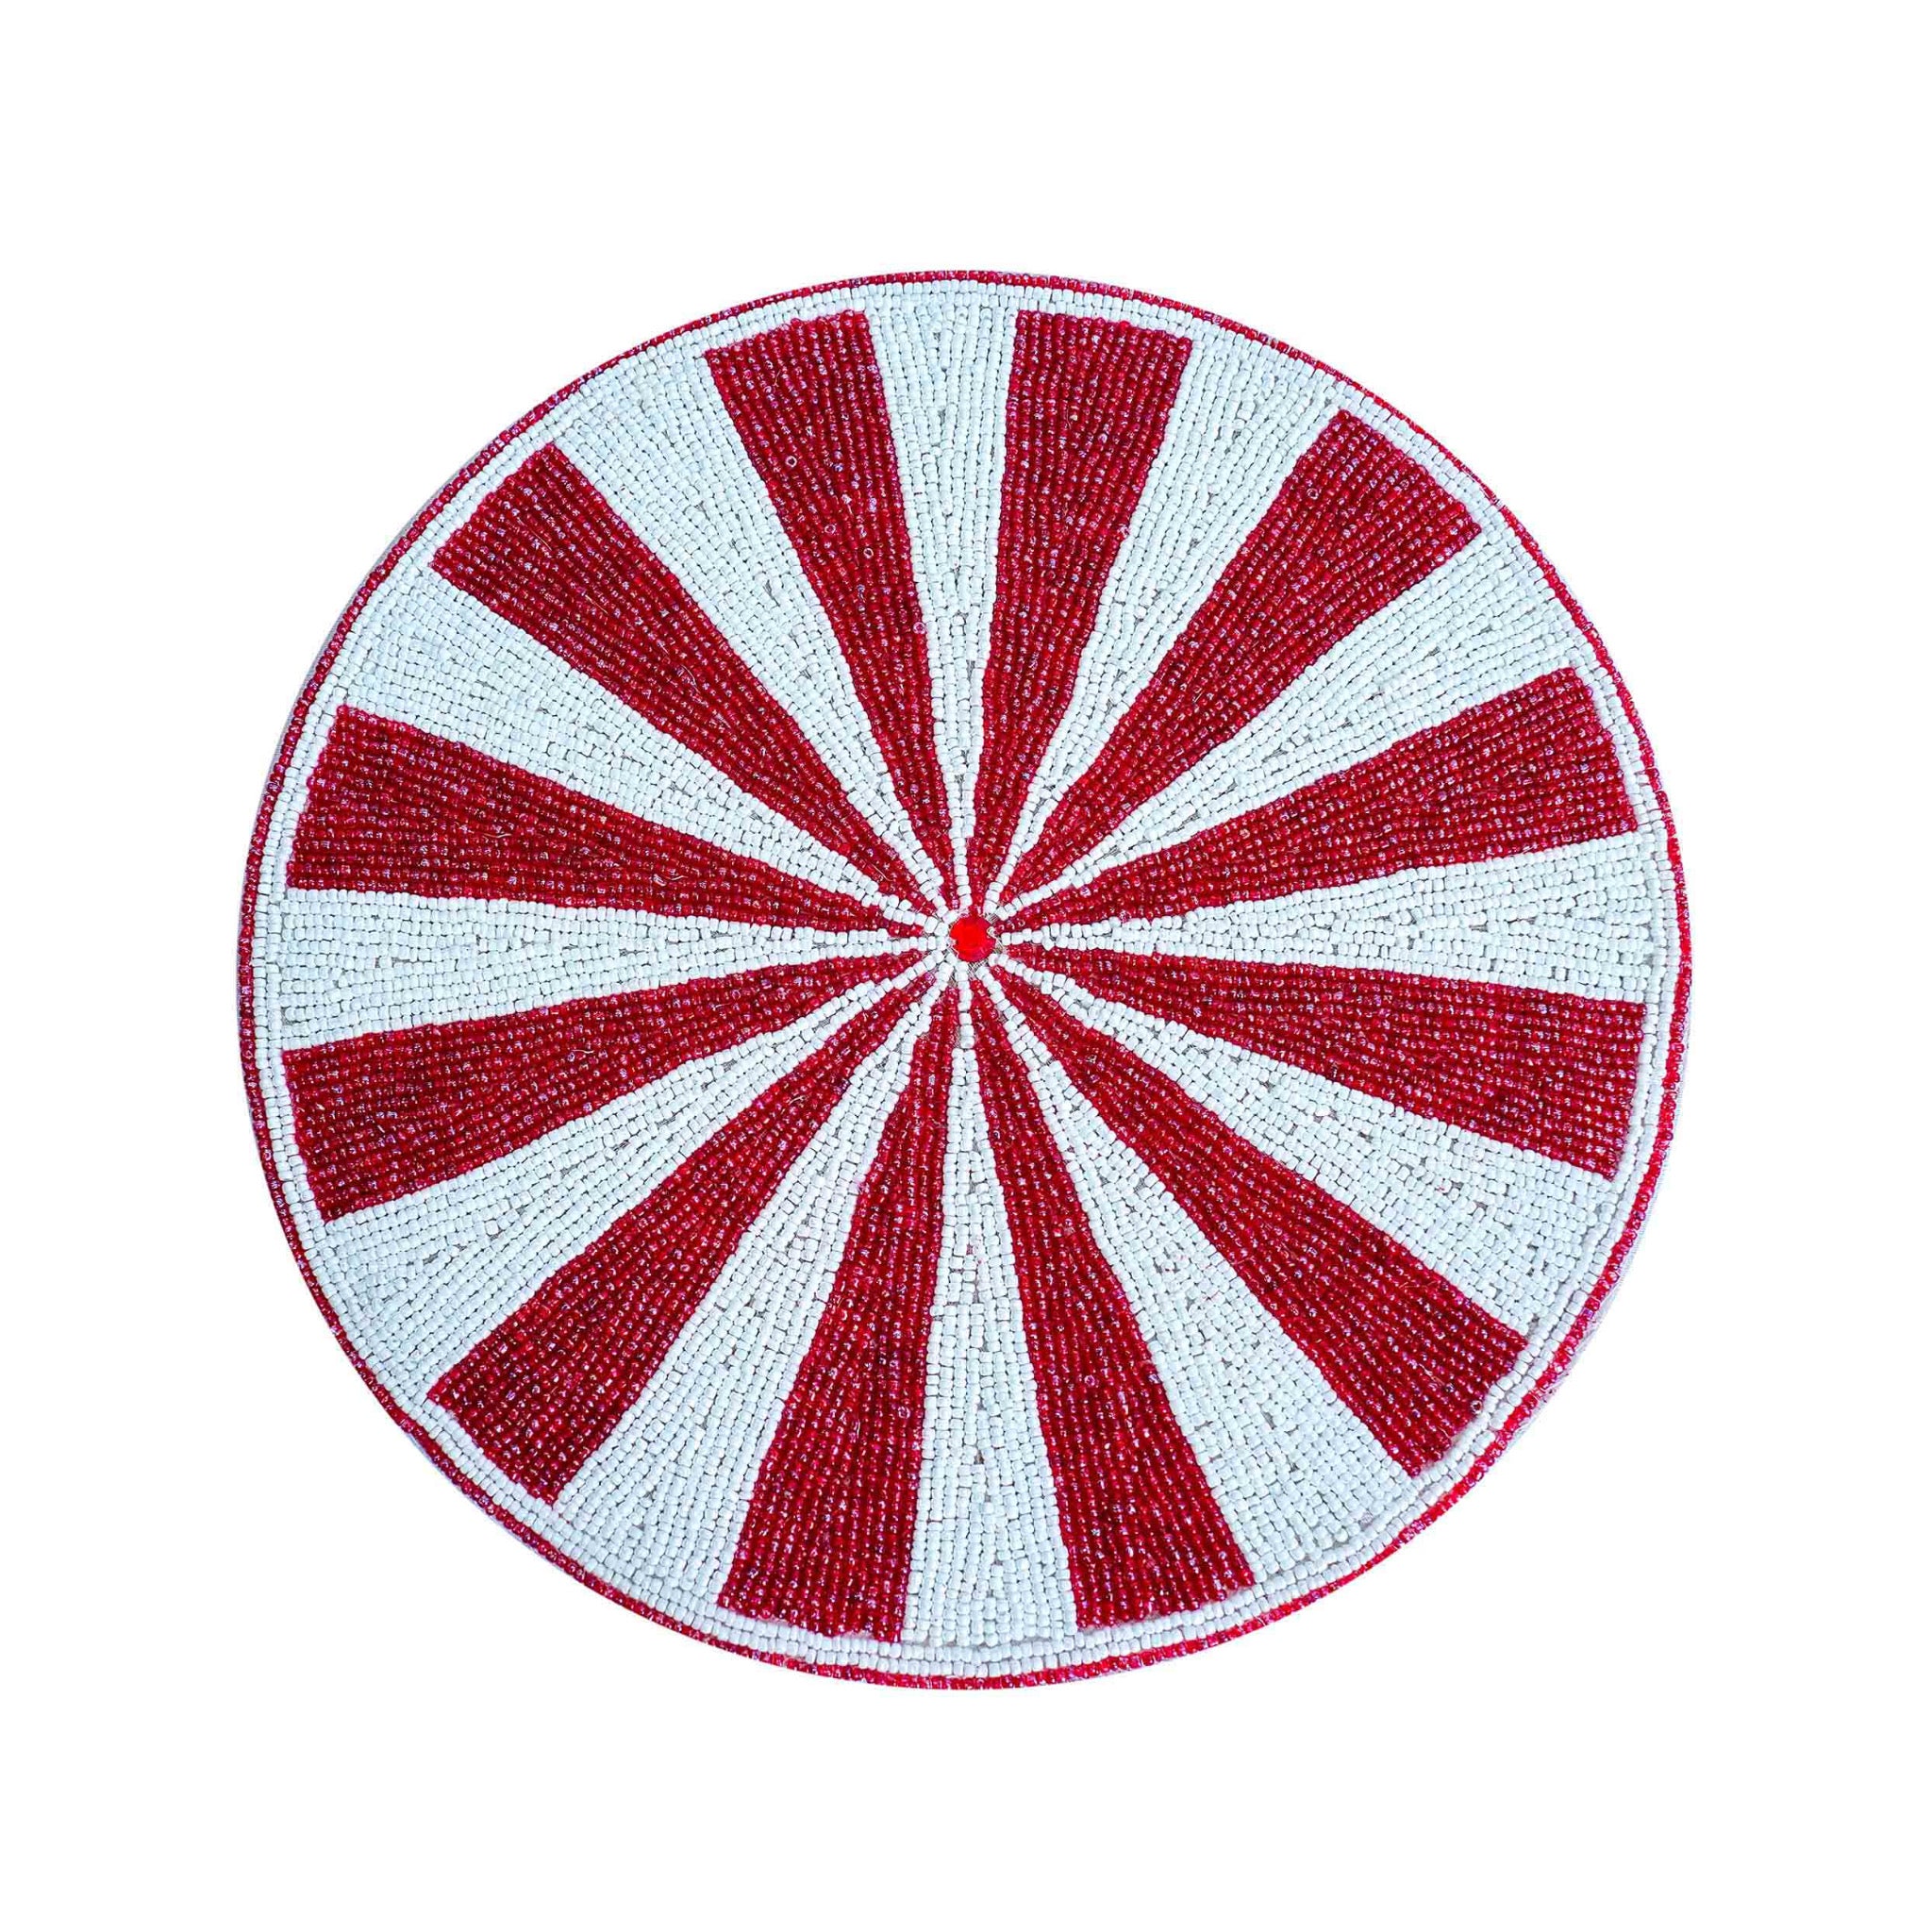 Minted Bead Embroidered Placemat in  Red & White, Set 2/4